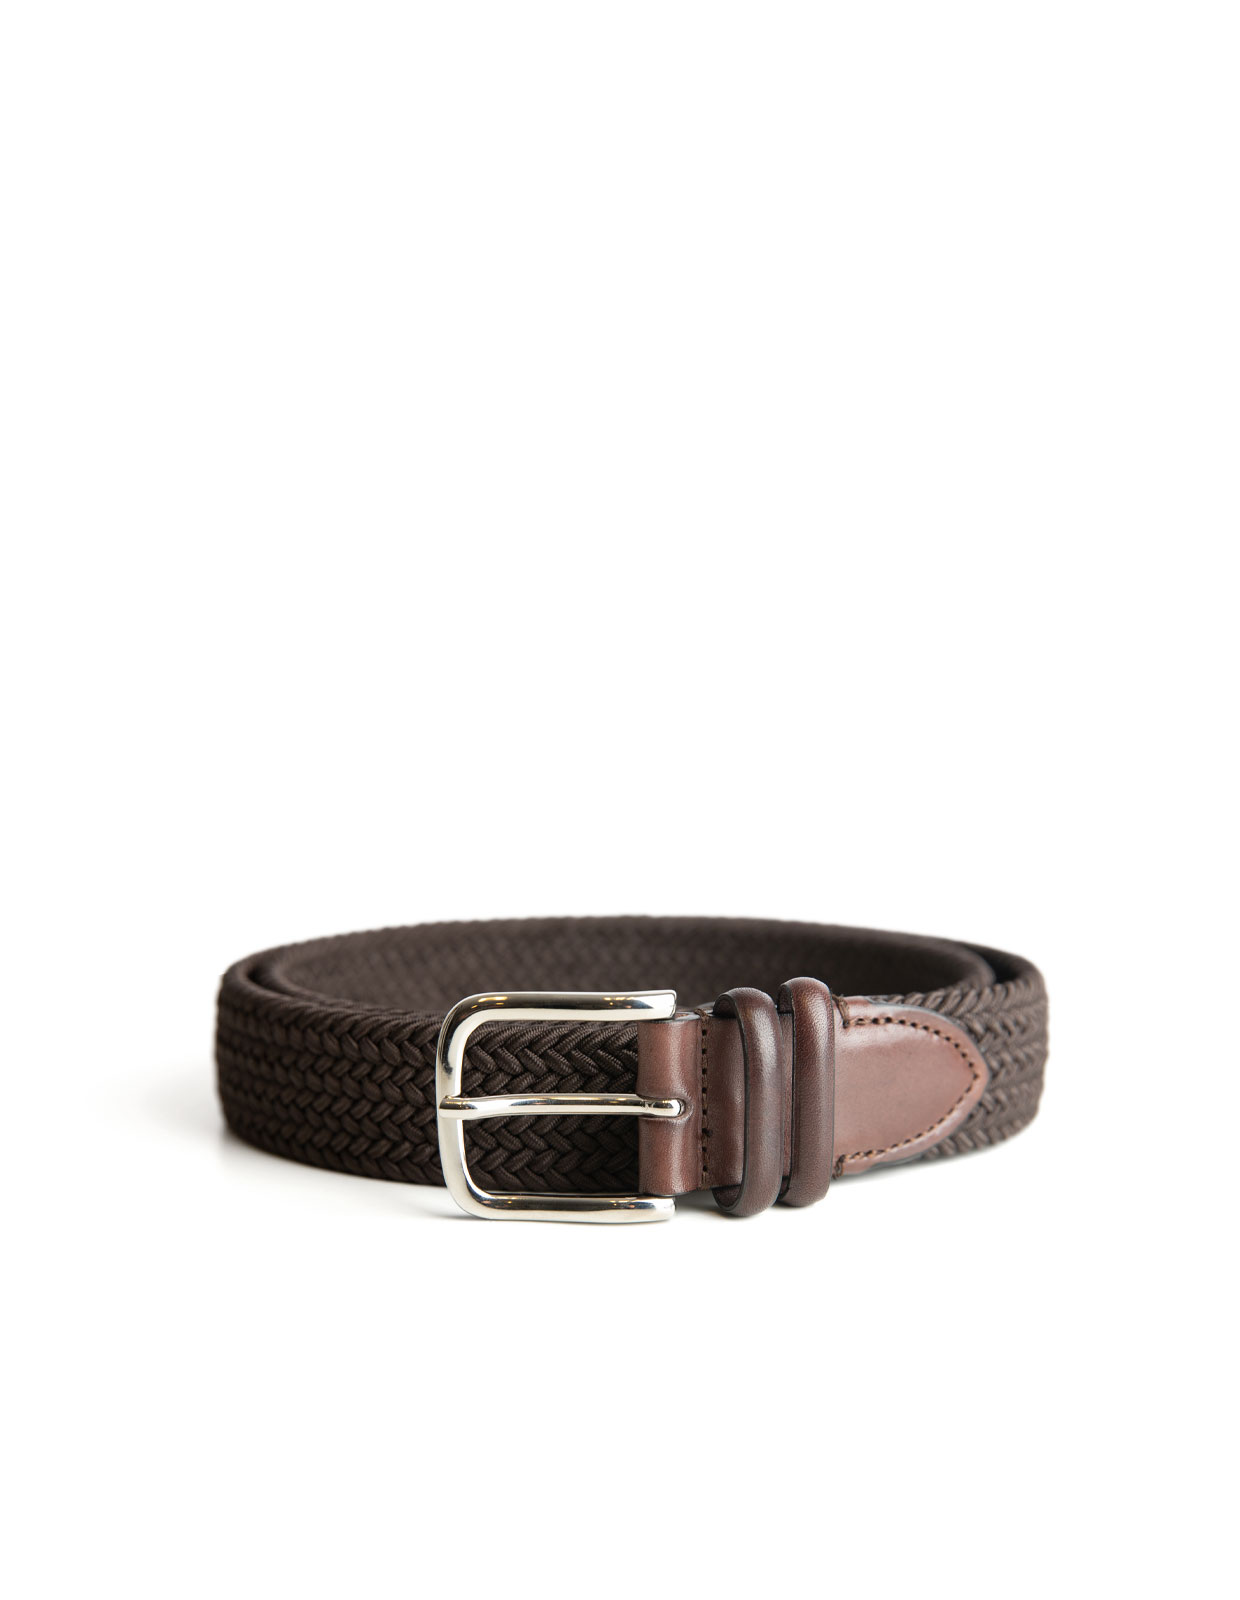 Woven Stretched Rayon Belt Dark Brown Stl 115